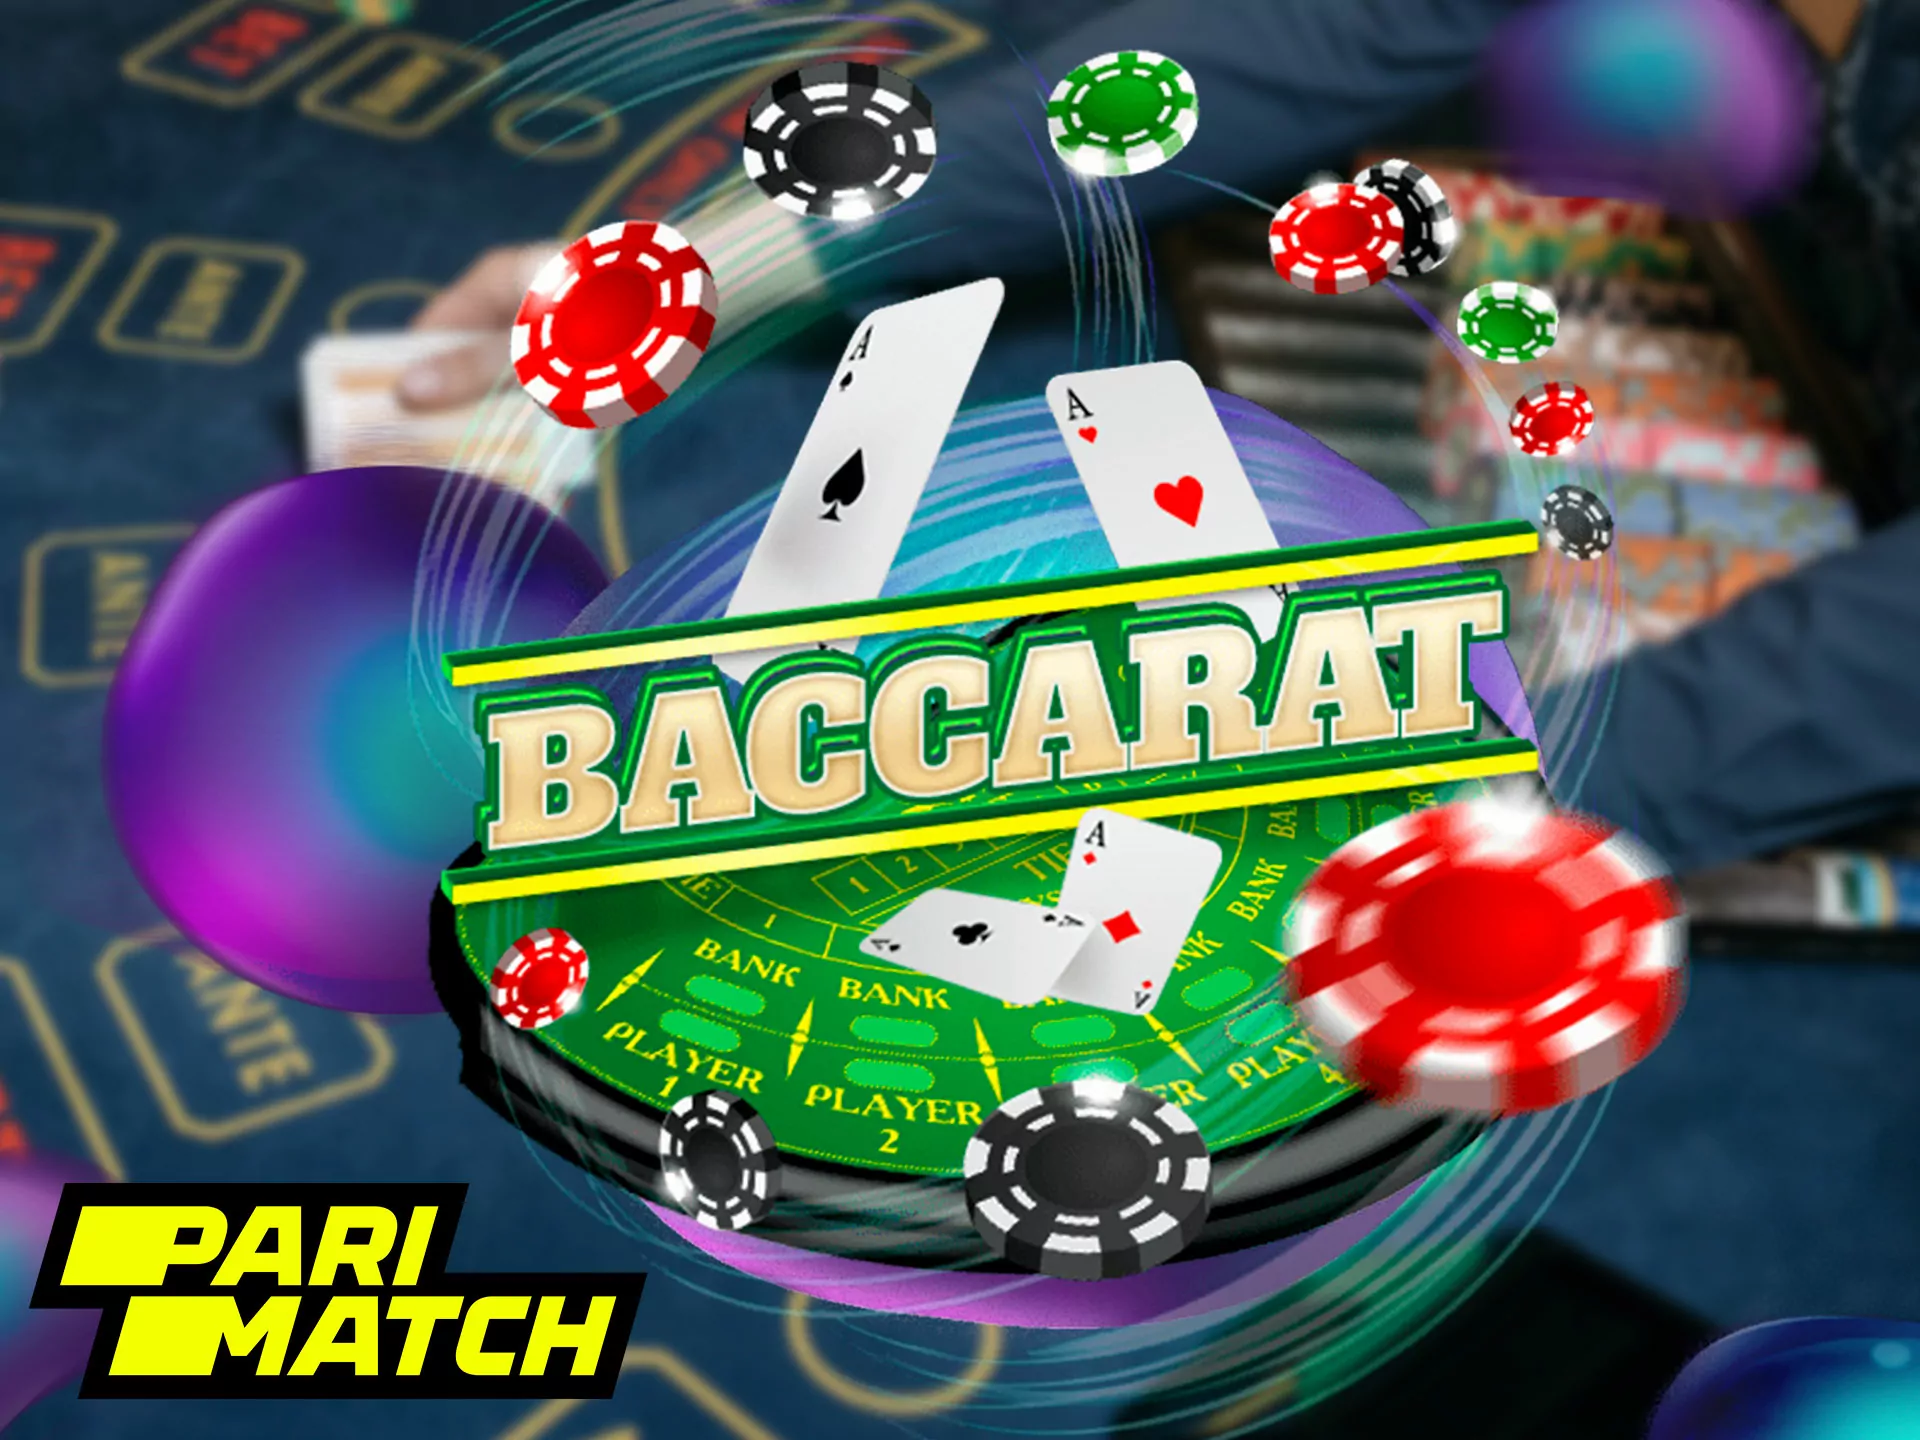 You have the opportunity to play this exciting game with live dealers, the drawing will take place taking into account the choice of the player on the Parimatch website.